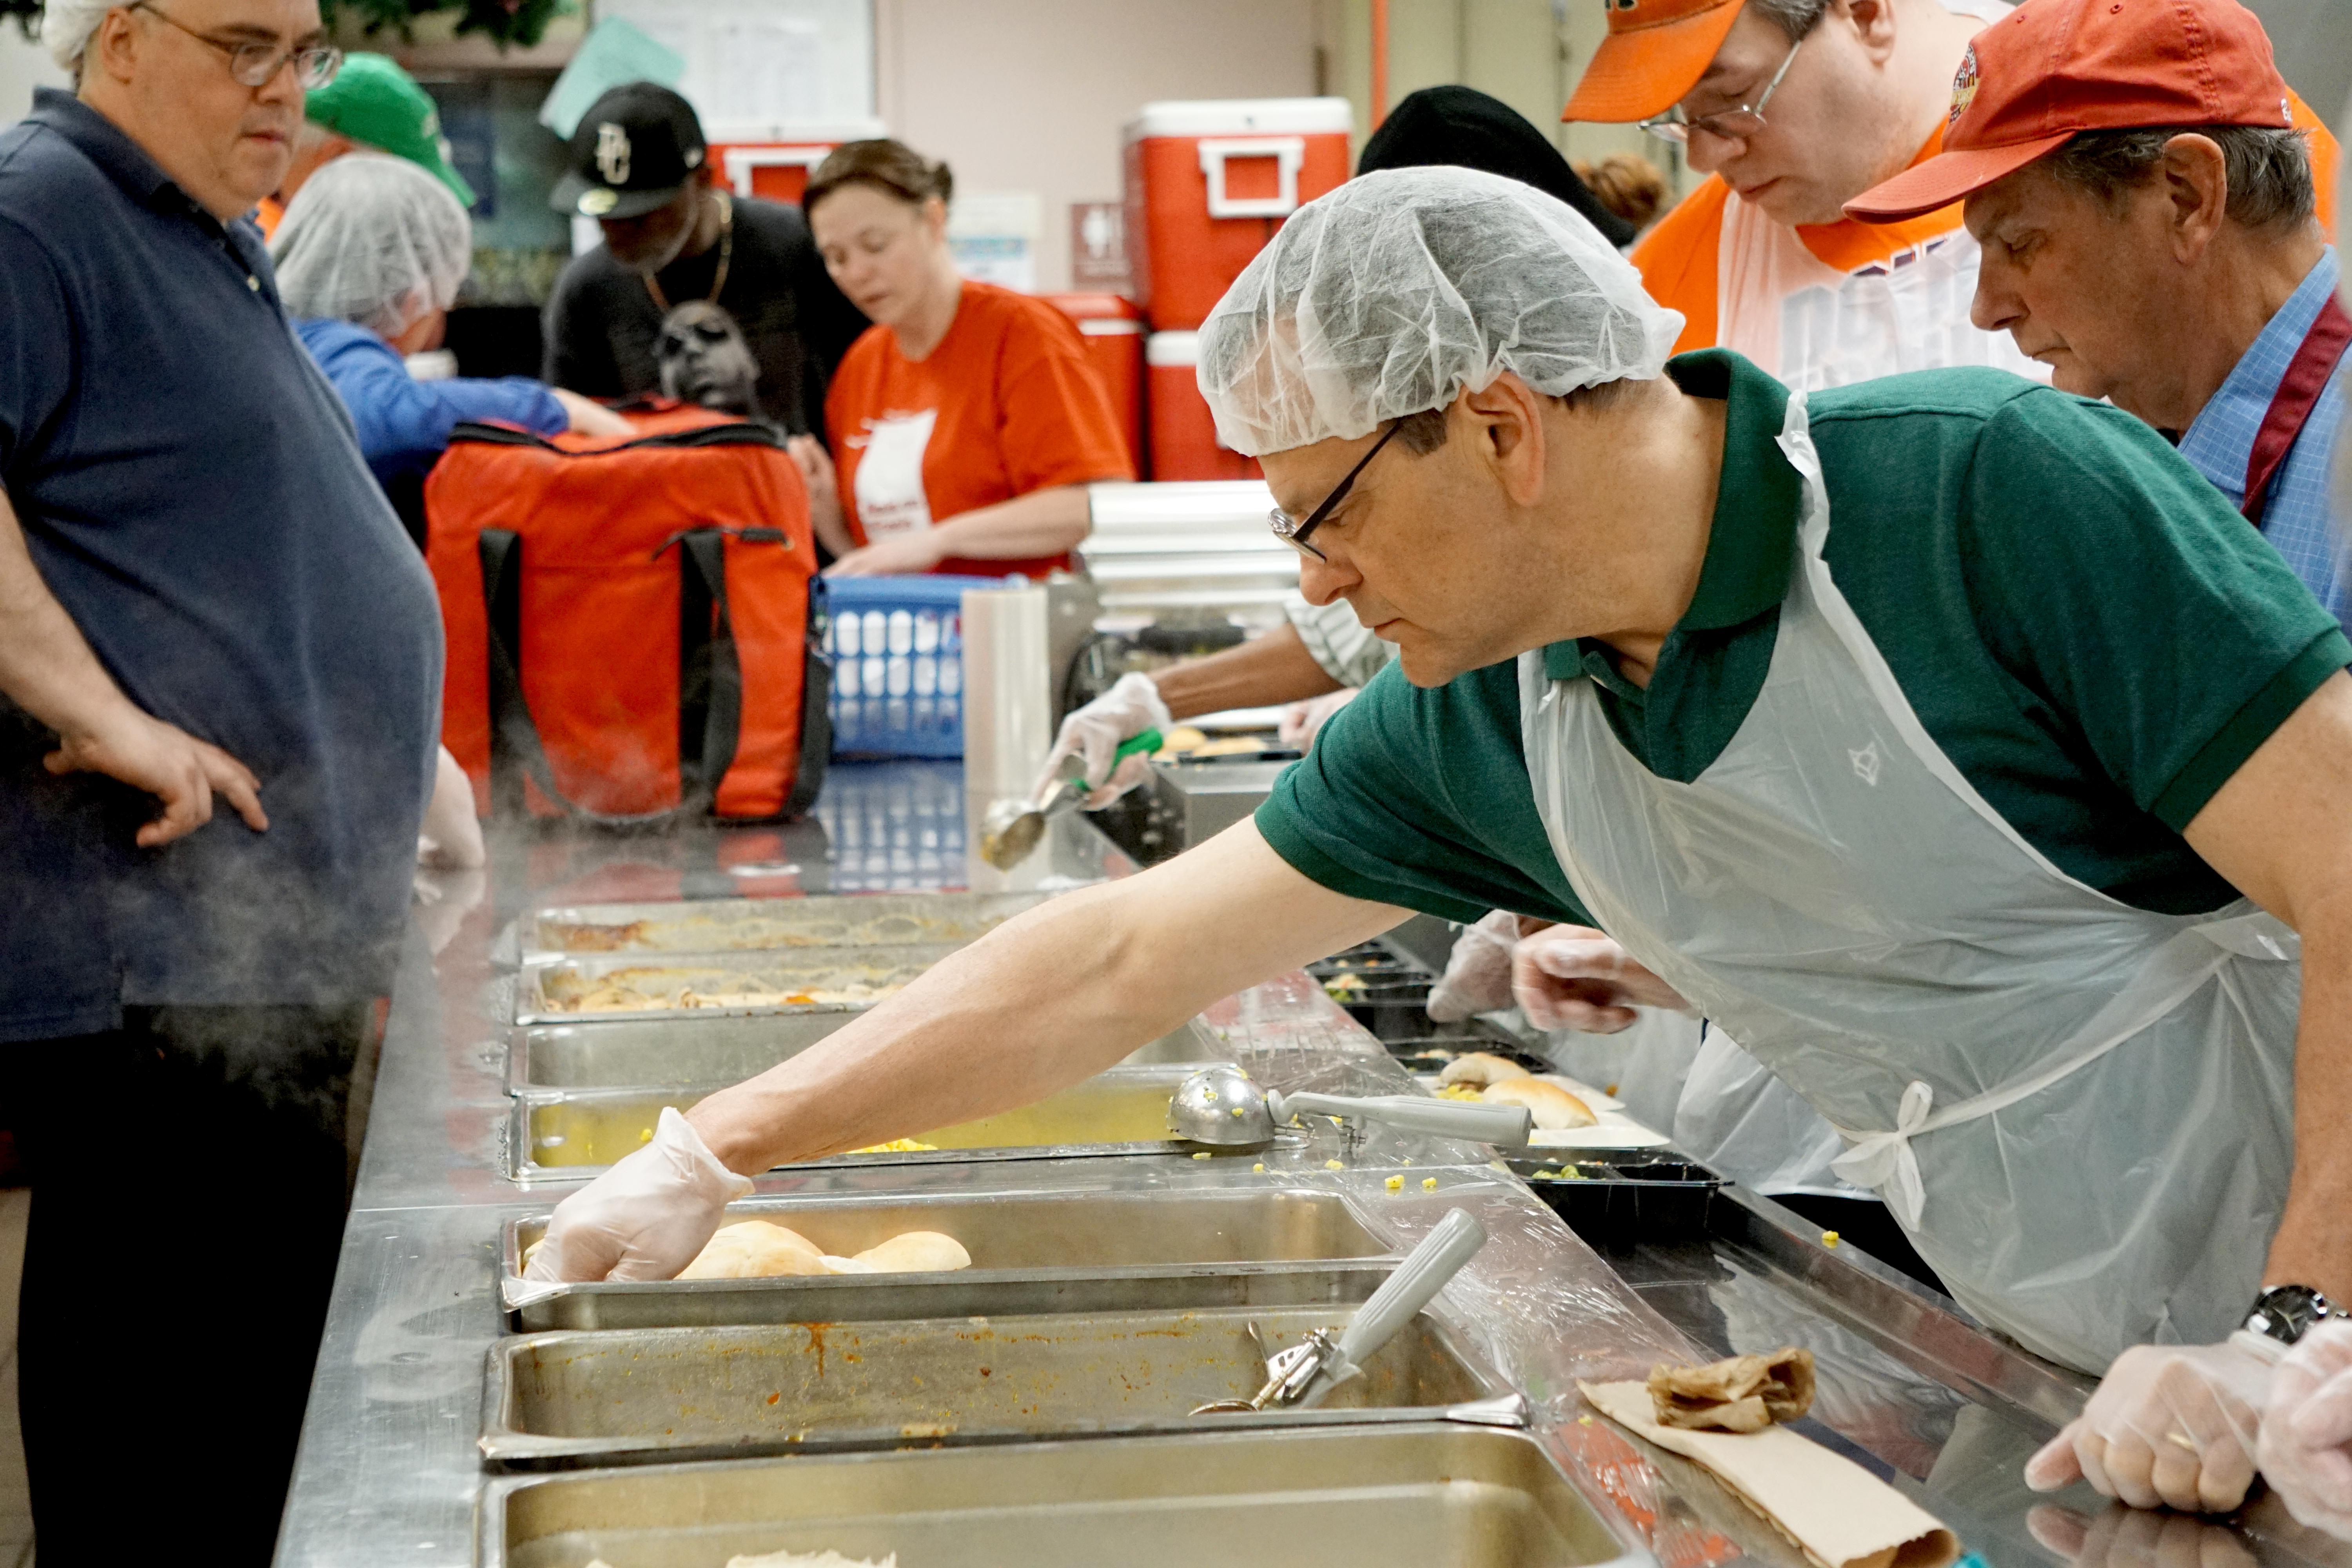 The food prep line at Meals on Wheels operates like a conveyer belt, Kaufman explains. Food service staff prepare the food earlier in the morning before the volunteers arrive. Then, different meal items are passed down the line and ultimately placed in their microwave- and oven-safe trays before being wrapped tightly with cellophane.